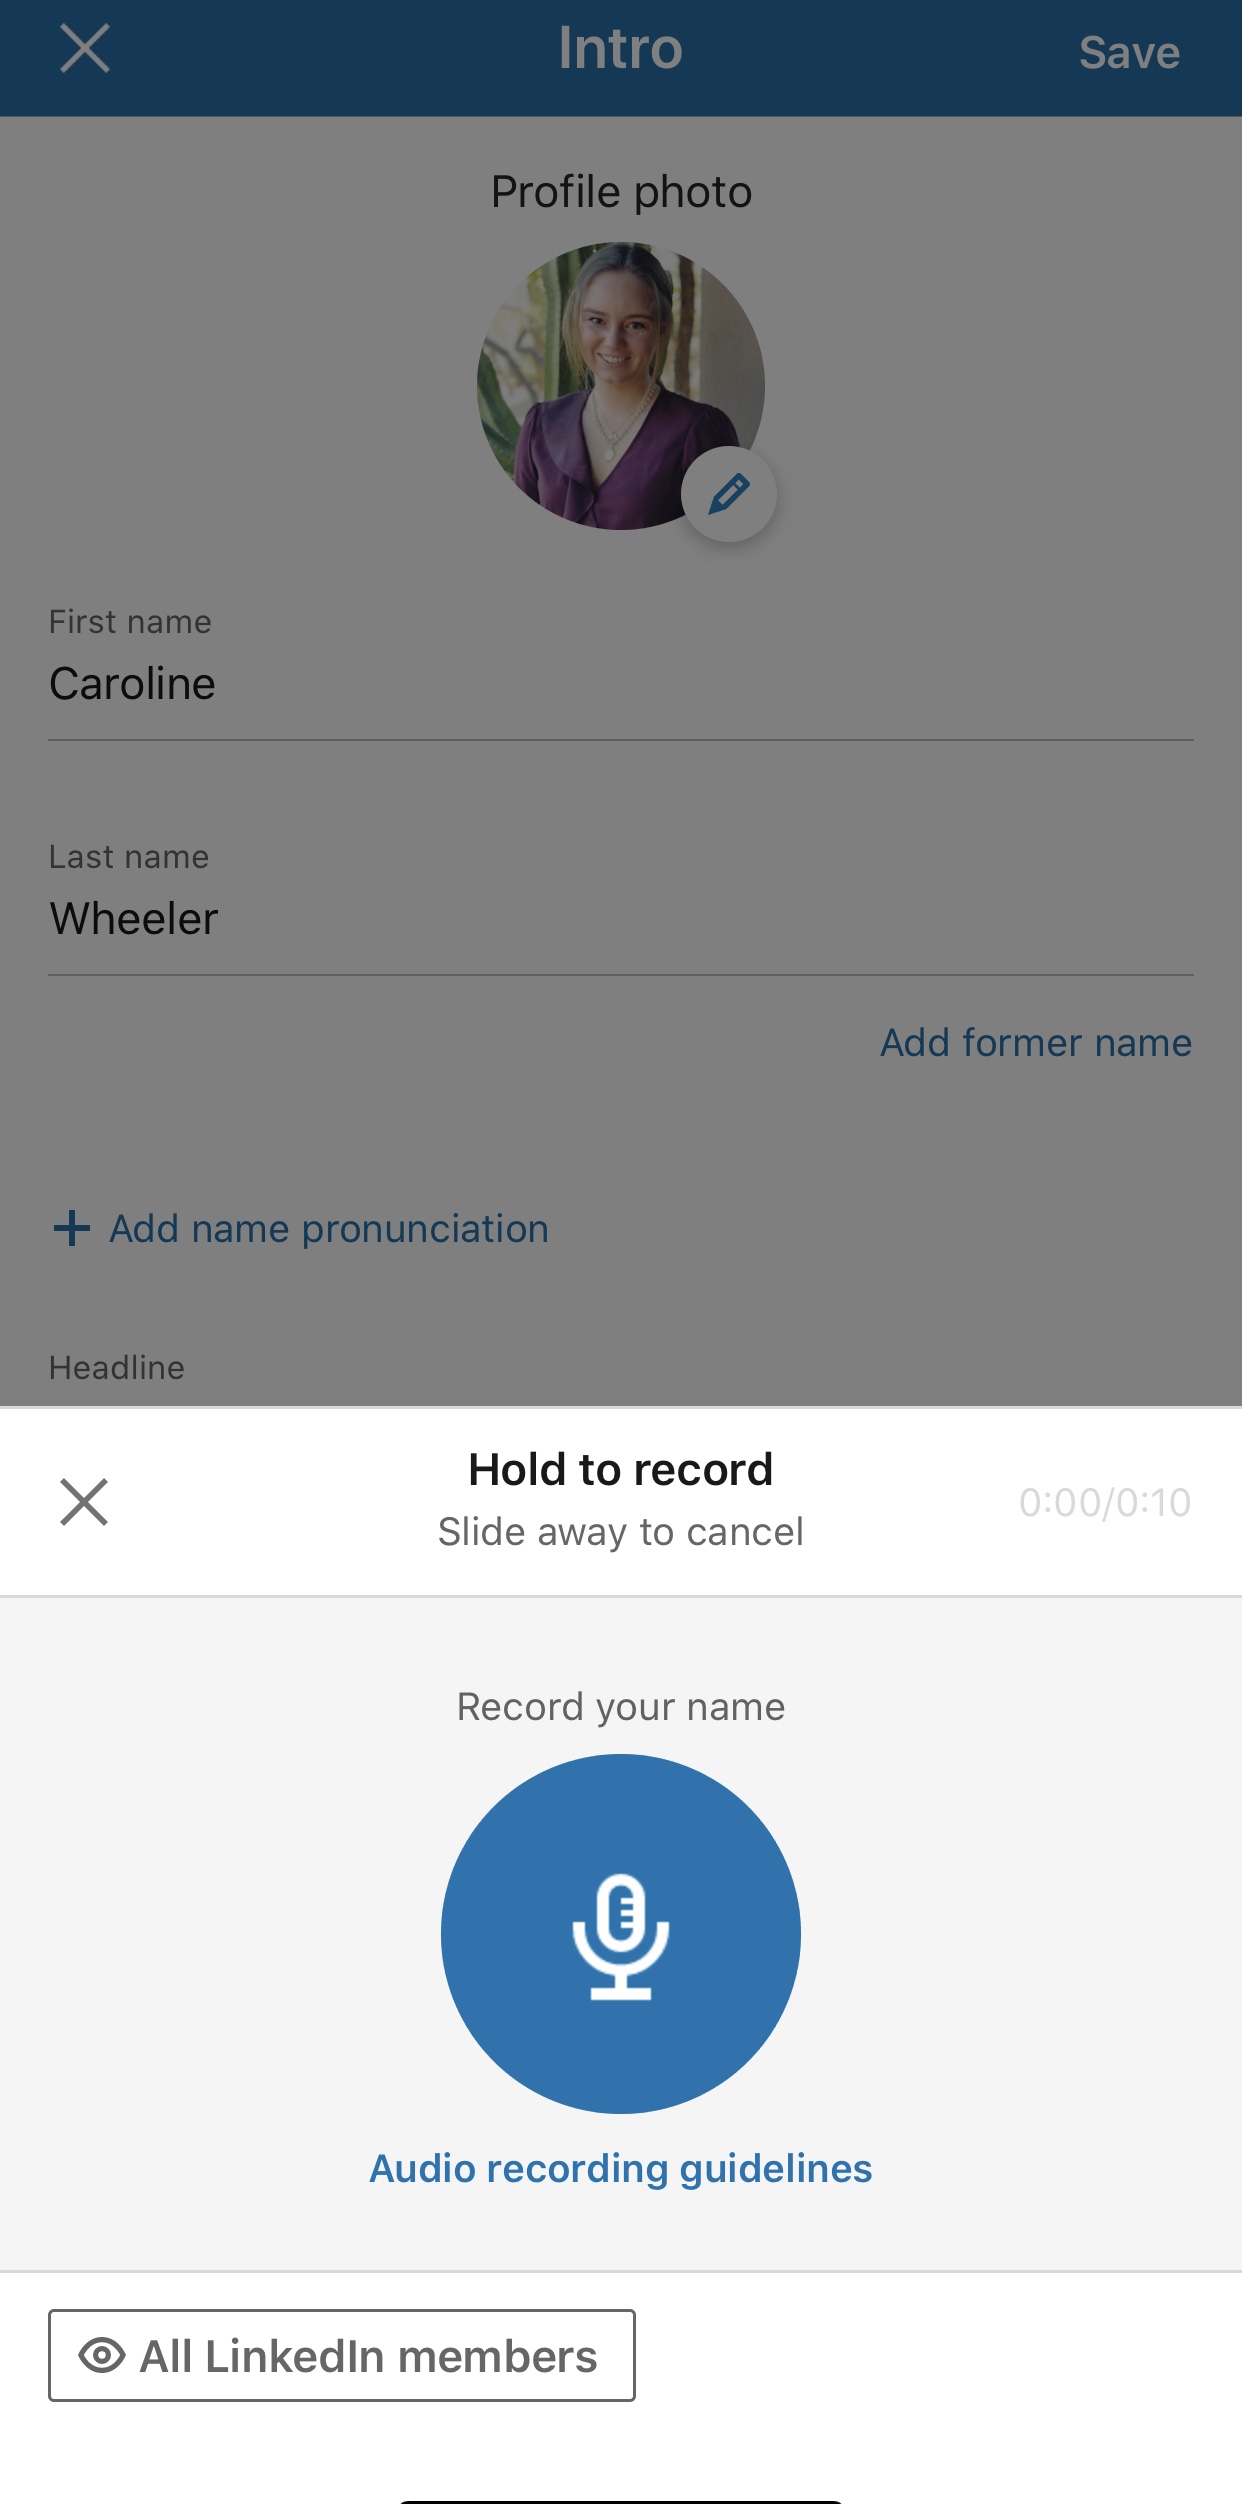 Name Pronunciation Feature Available on LinkedIn